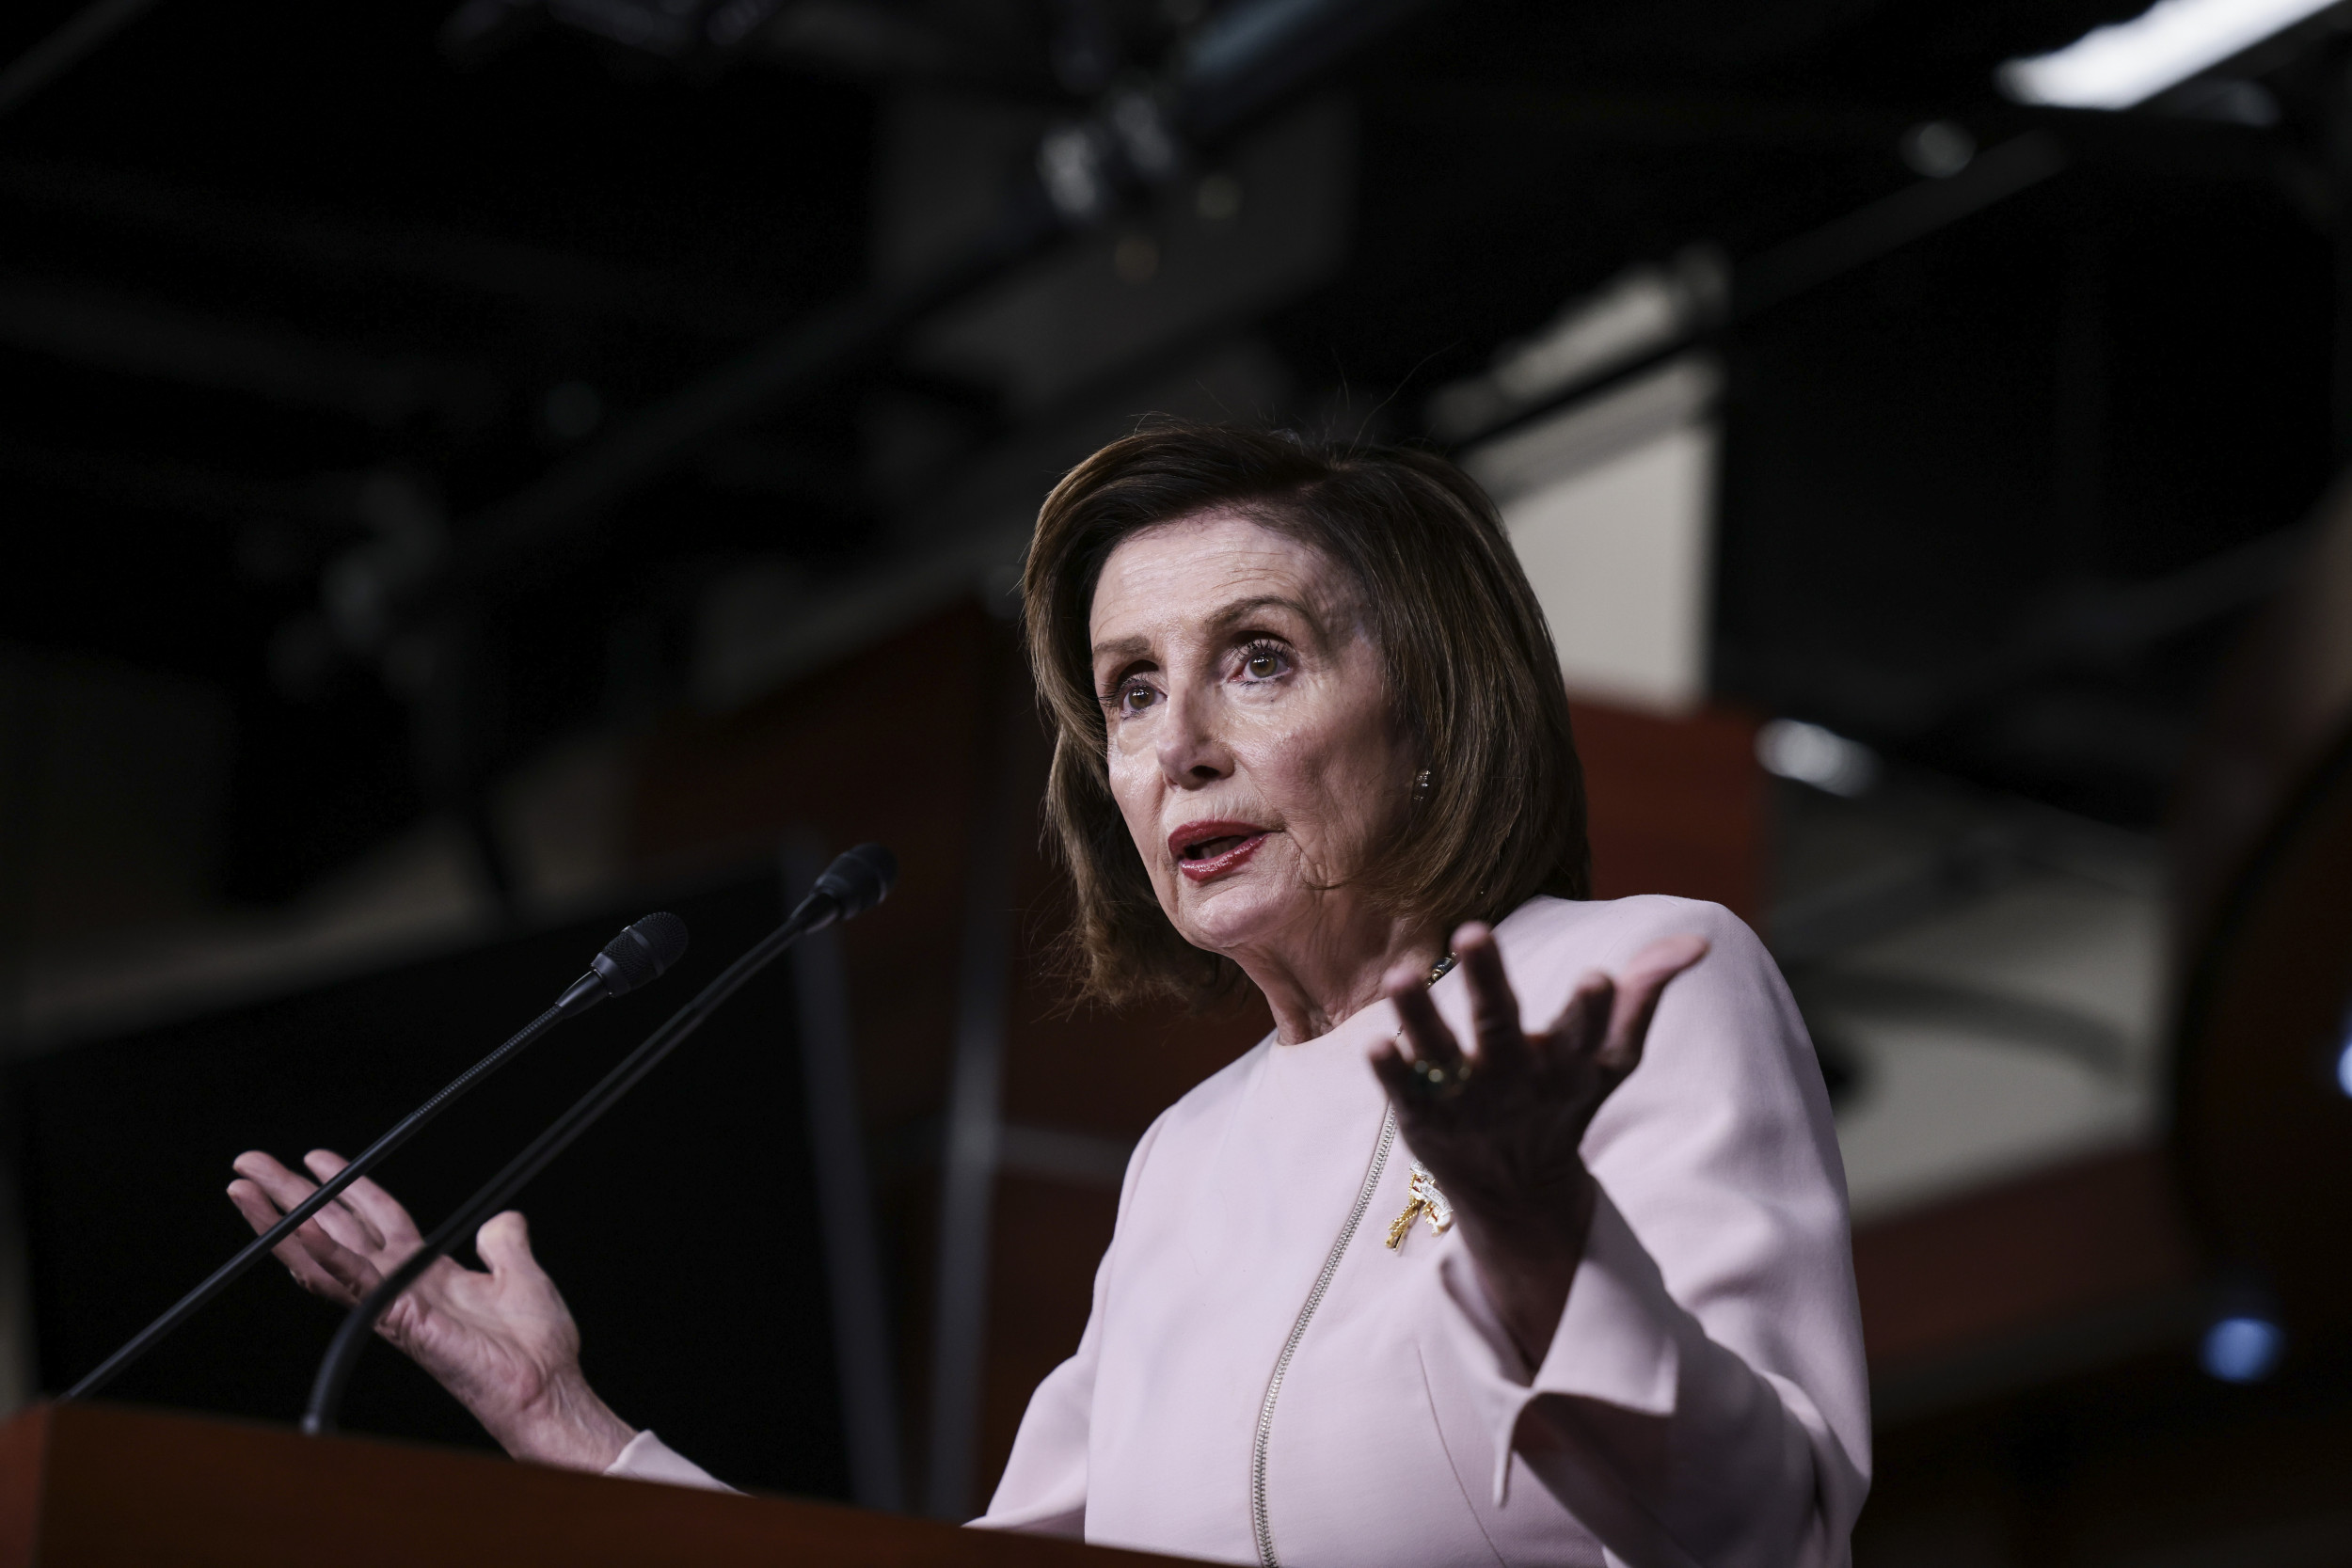 Nancy Pelosi: Democrats 'Pretty Much There' in Budget Deal as Biden Meets With Joe Manchin